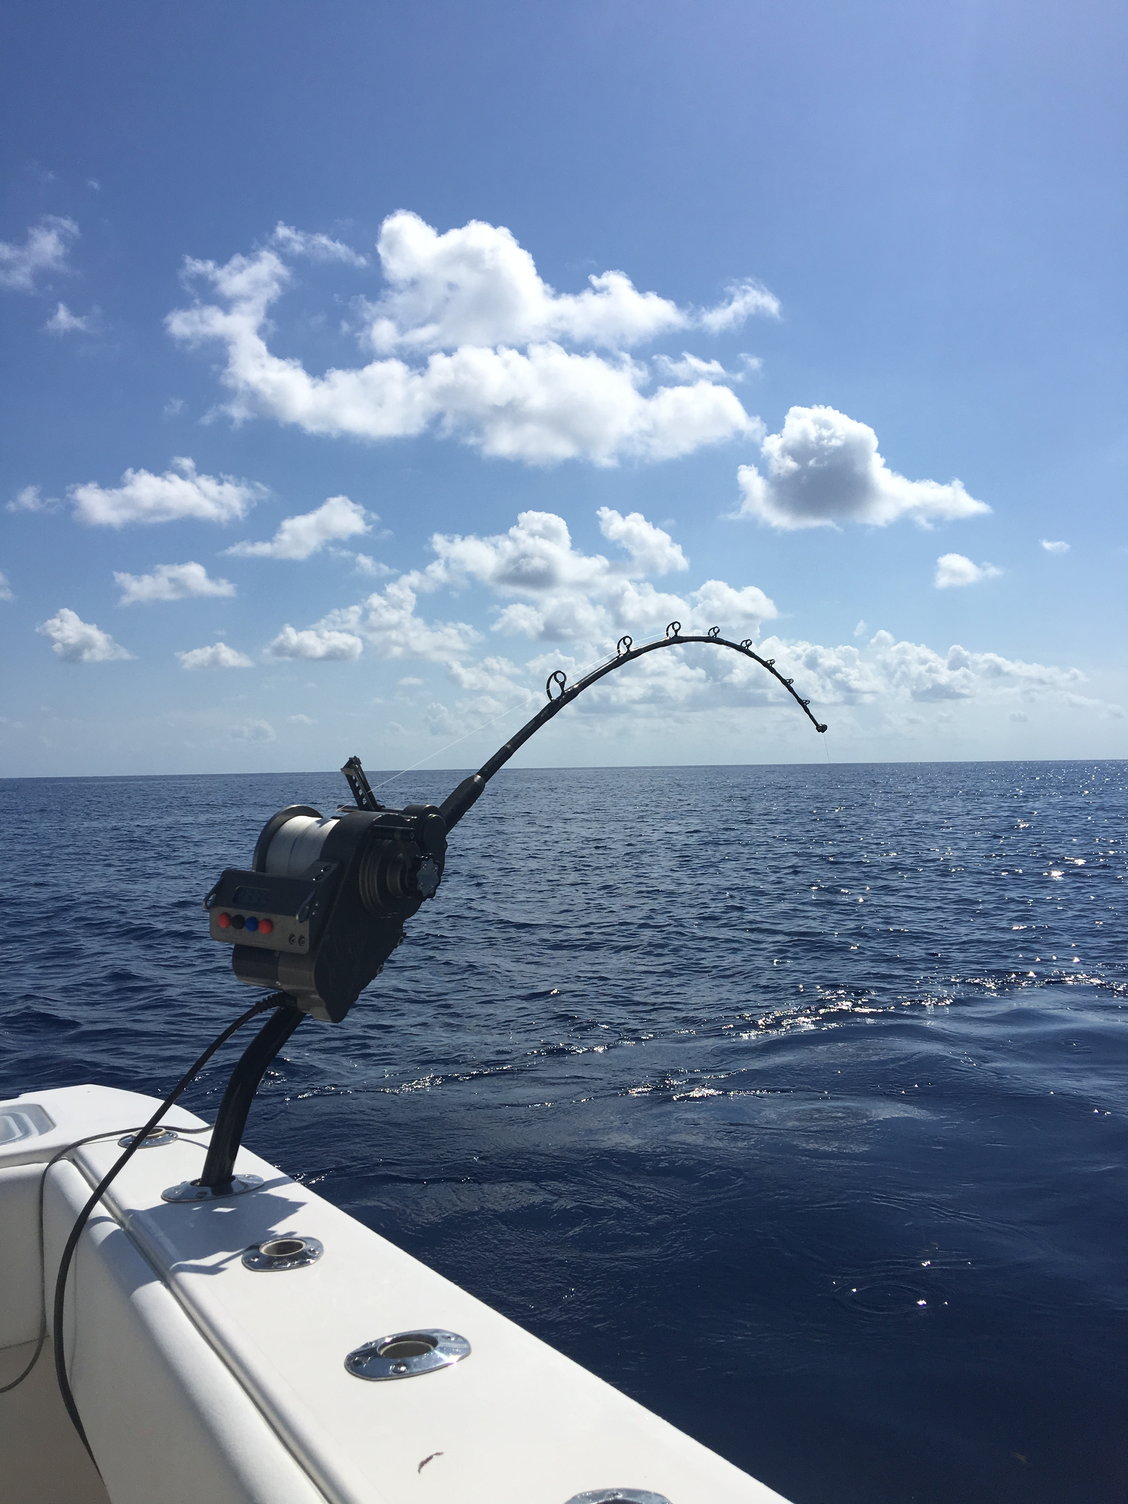 Daytime Swordfishing - Gulf of Mexico Tips & Tricks - The Hull Truth -  Boating and Fishing Forum